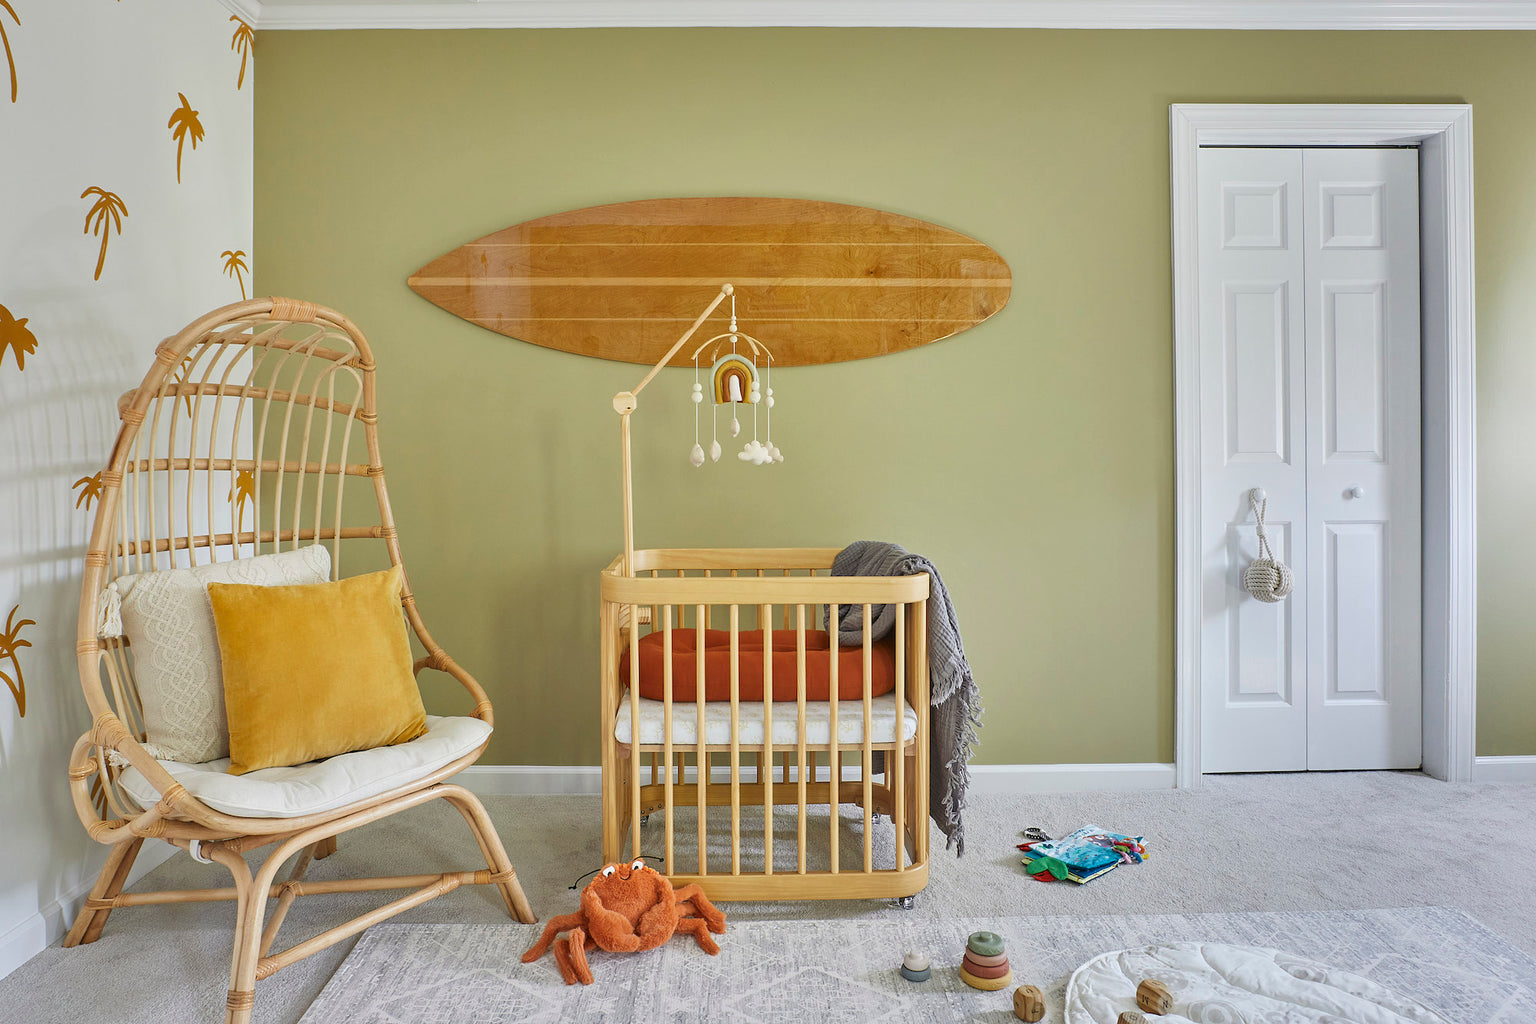 Local Art Brings Love and Life To This Surf Themed Nursery